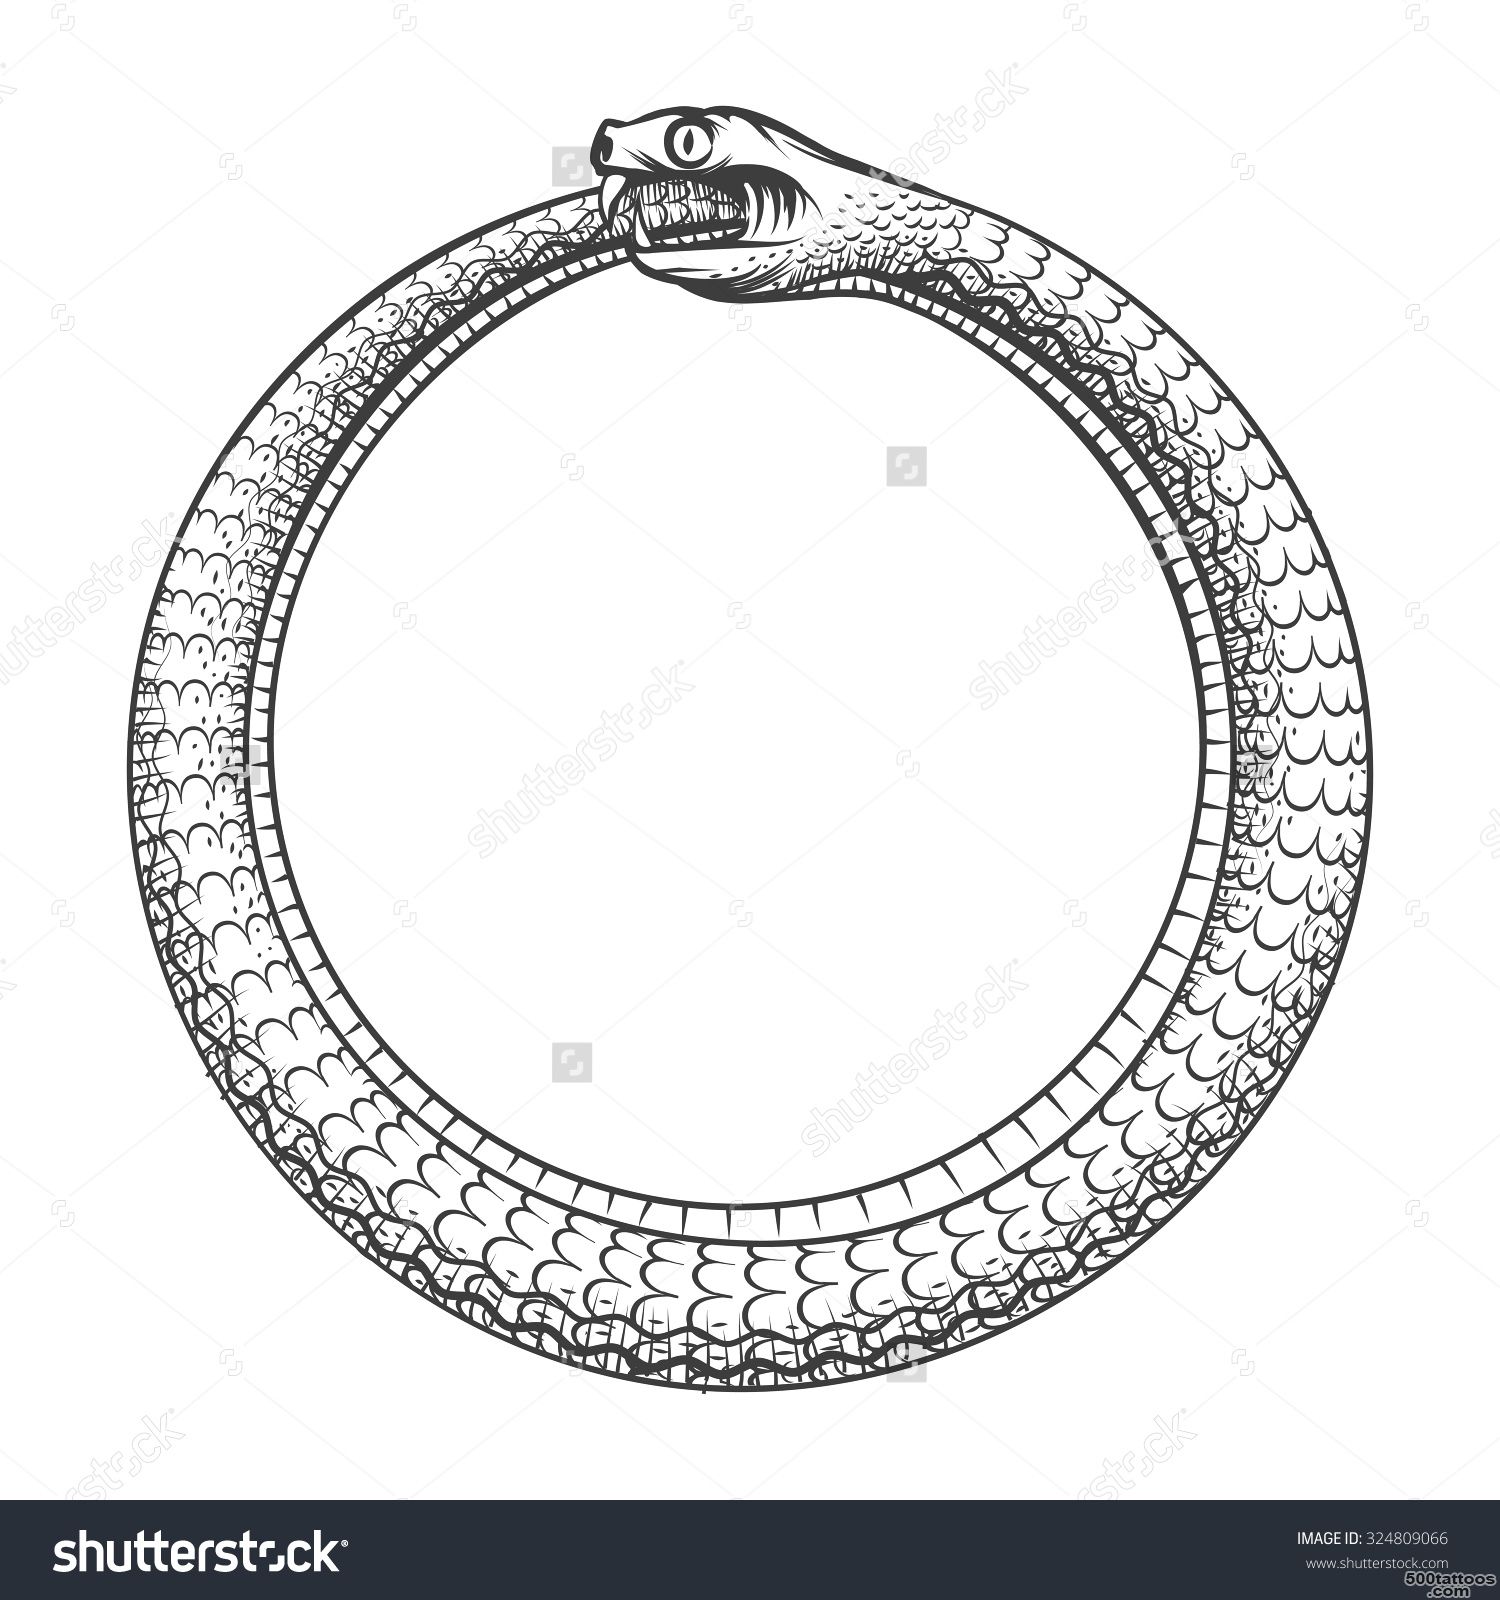 Magic Symbol Of Ouroboros. Tattoo With Snake Biting Its Own Tail ..._35